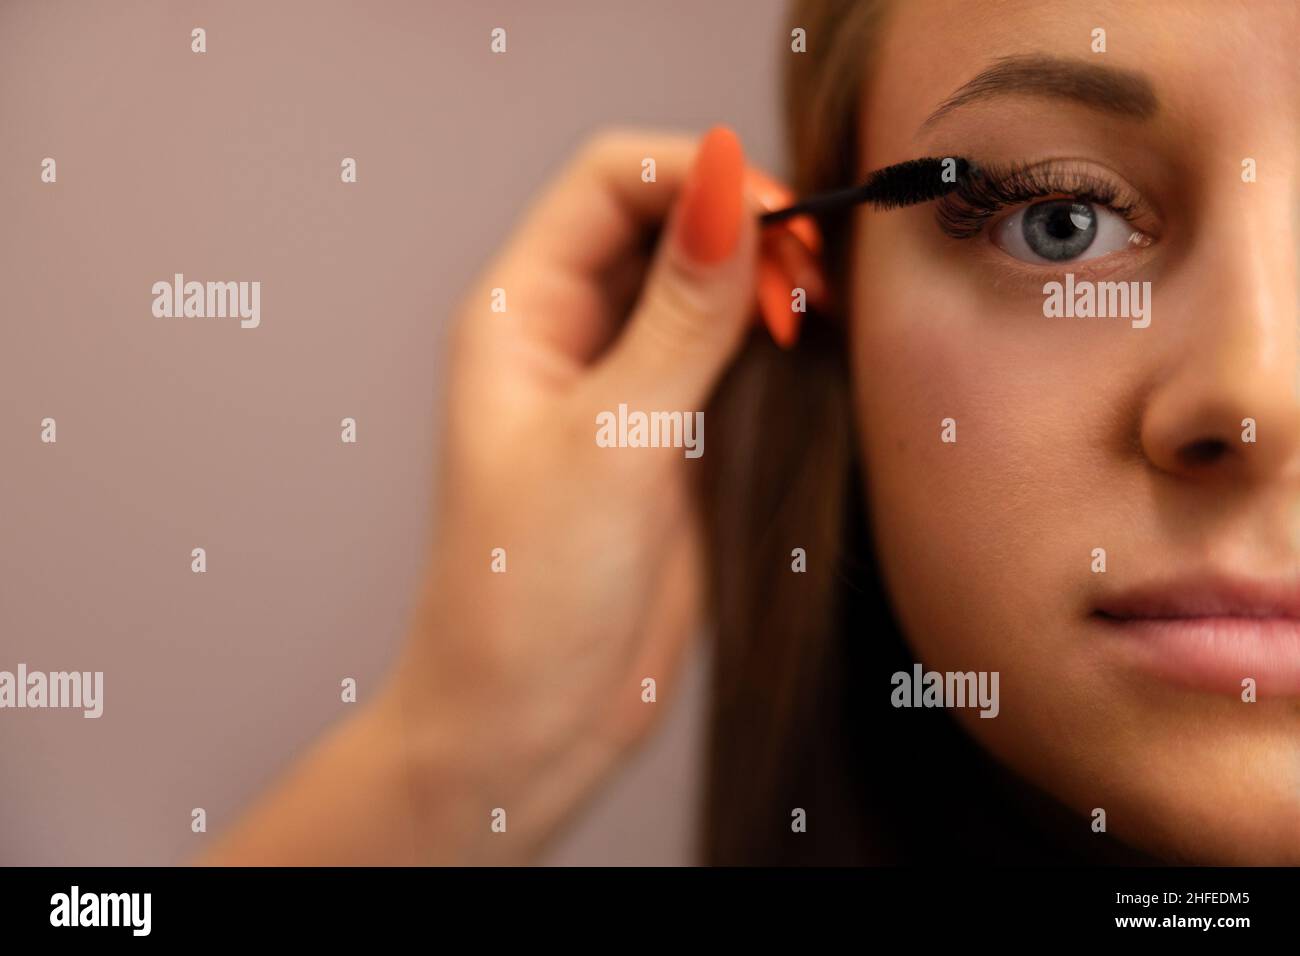 Portrait Of Woman With Cosmetologist Hand Using Mascara Stock Photo